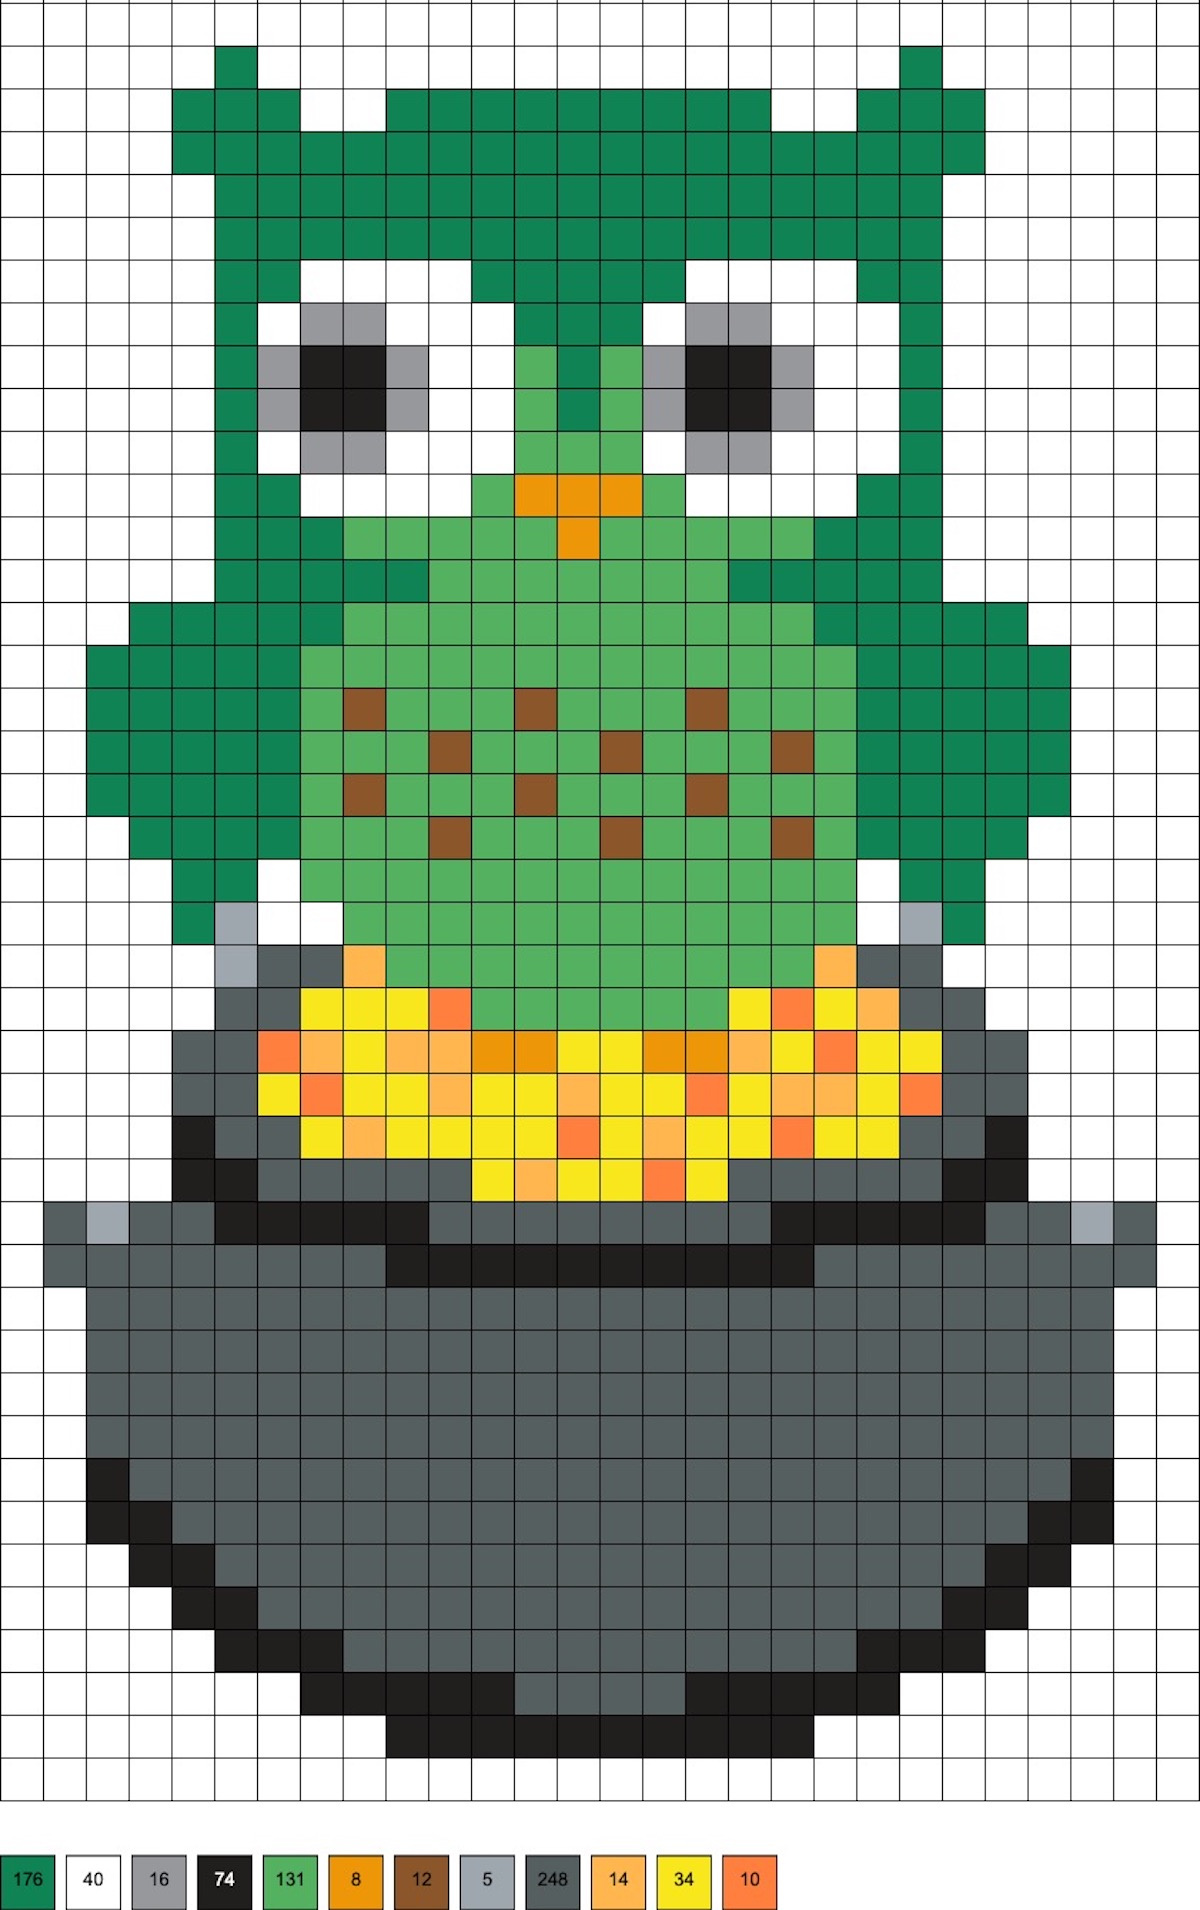 green owl standing on a pot of gold